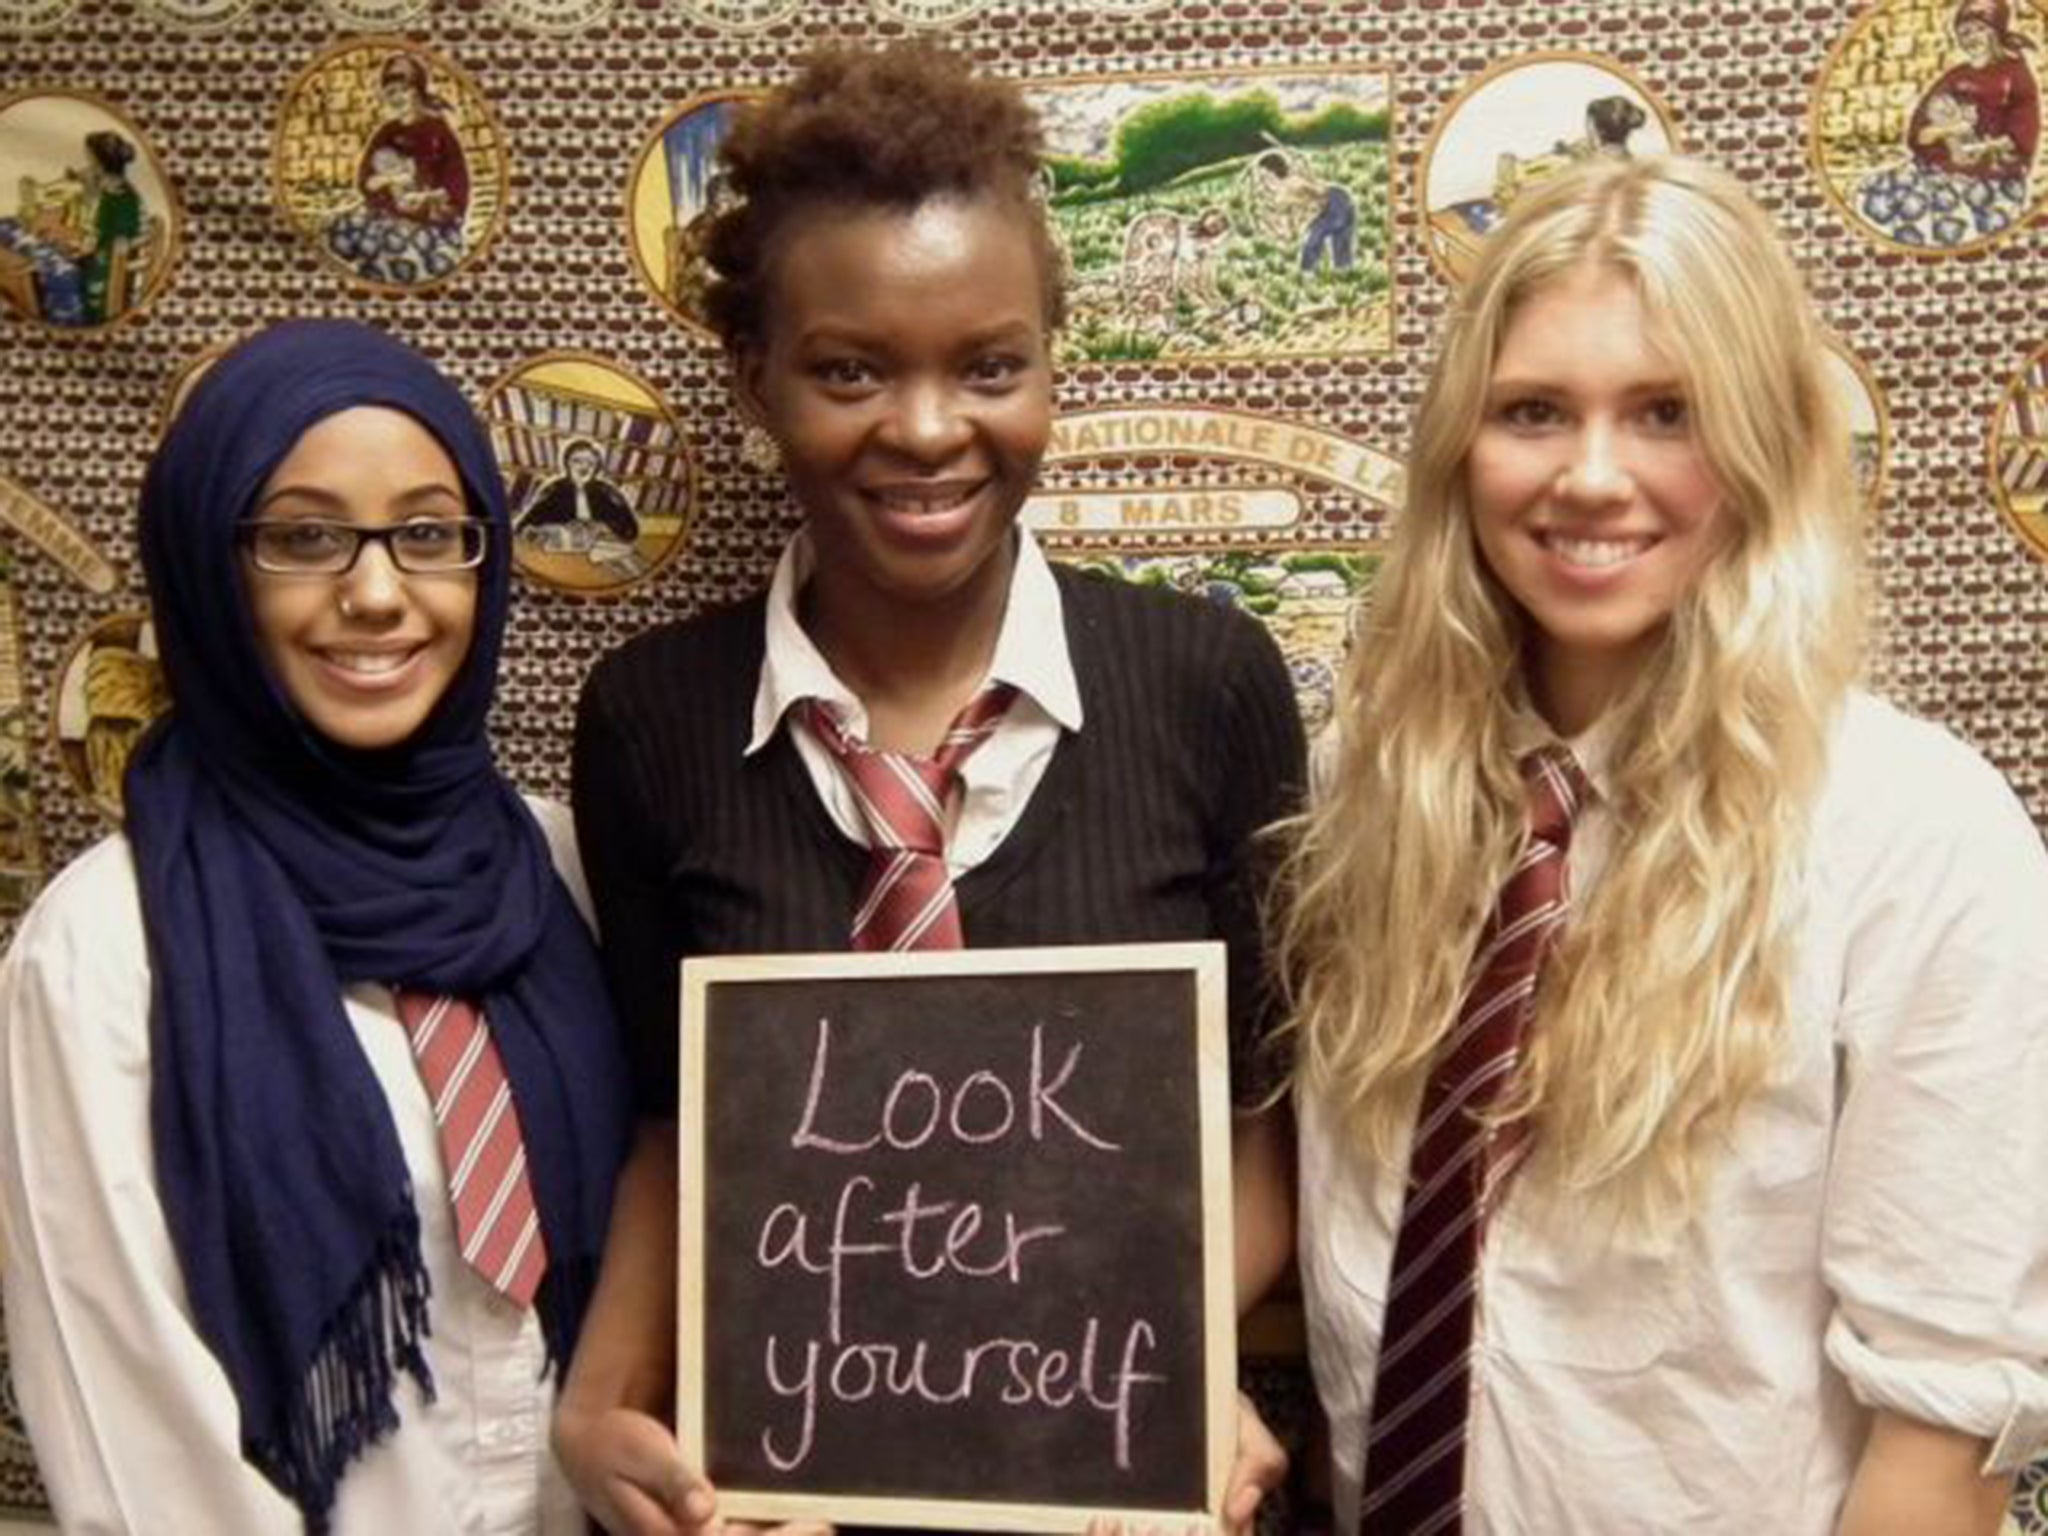 Pupils show that FGM should not be a taboo subject